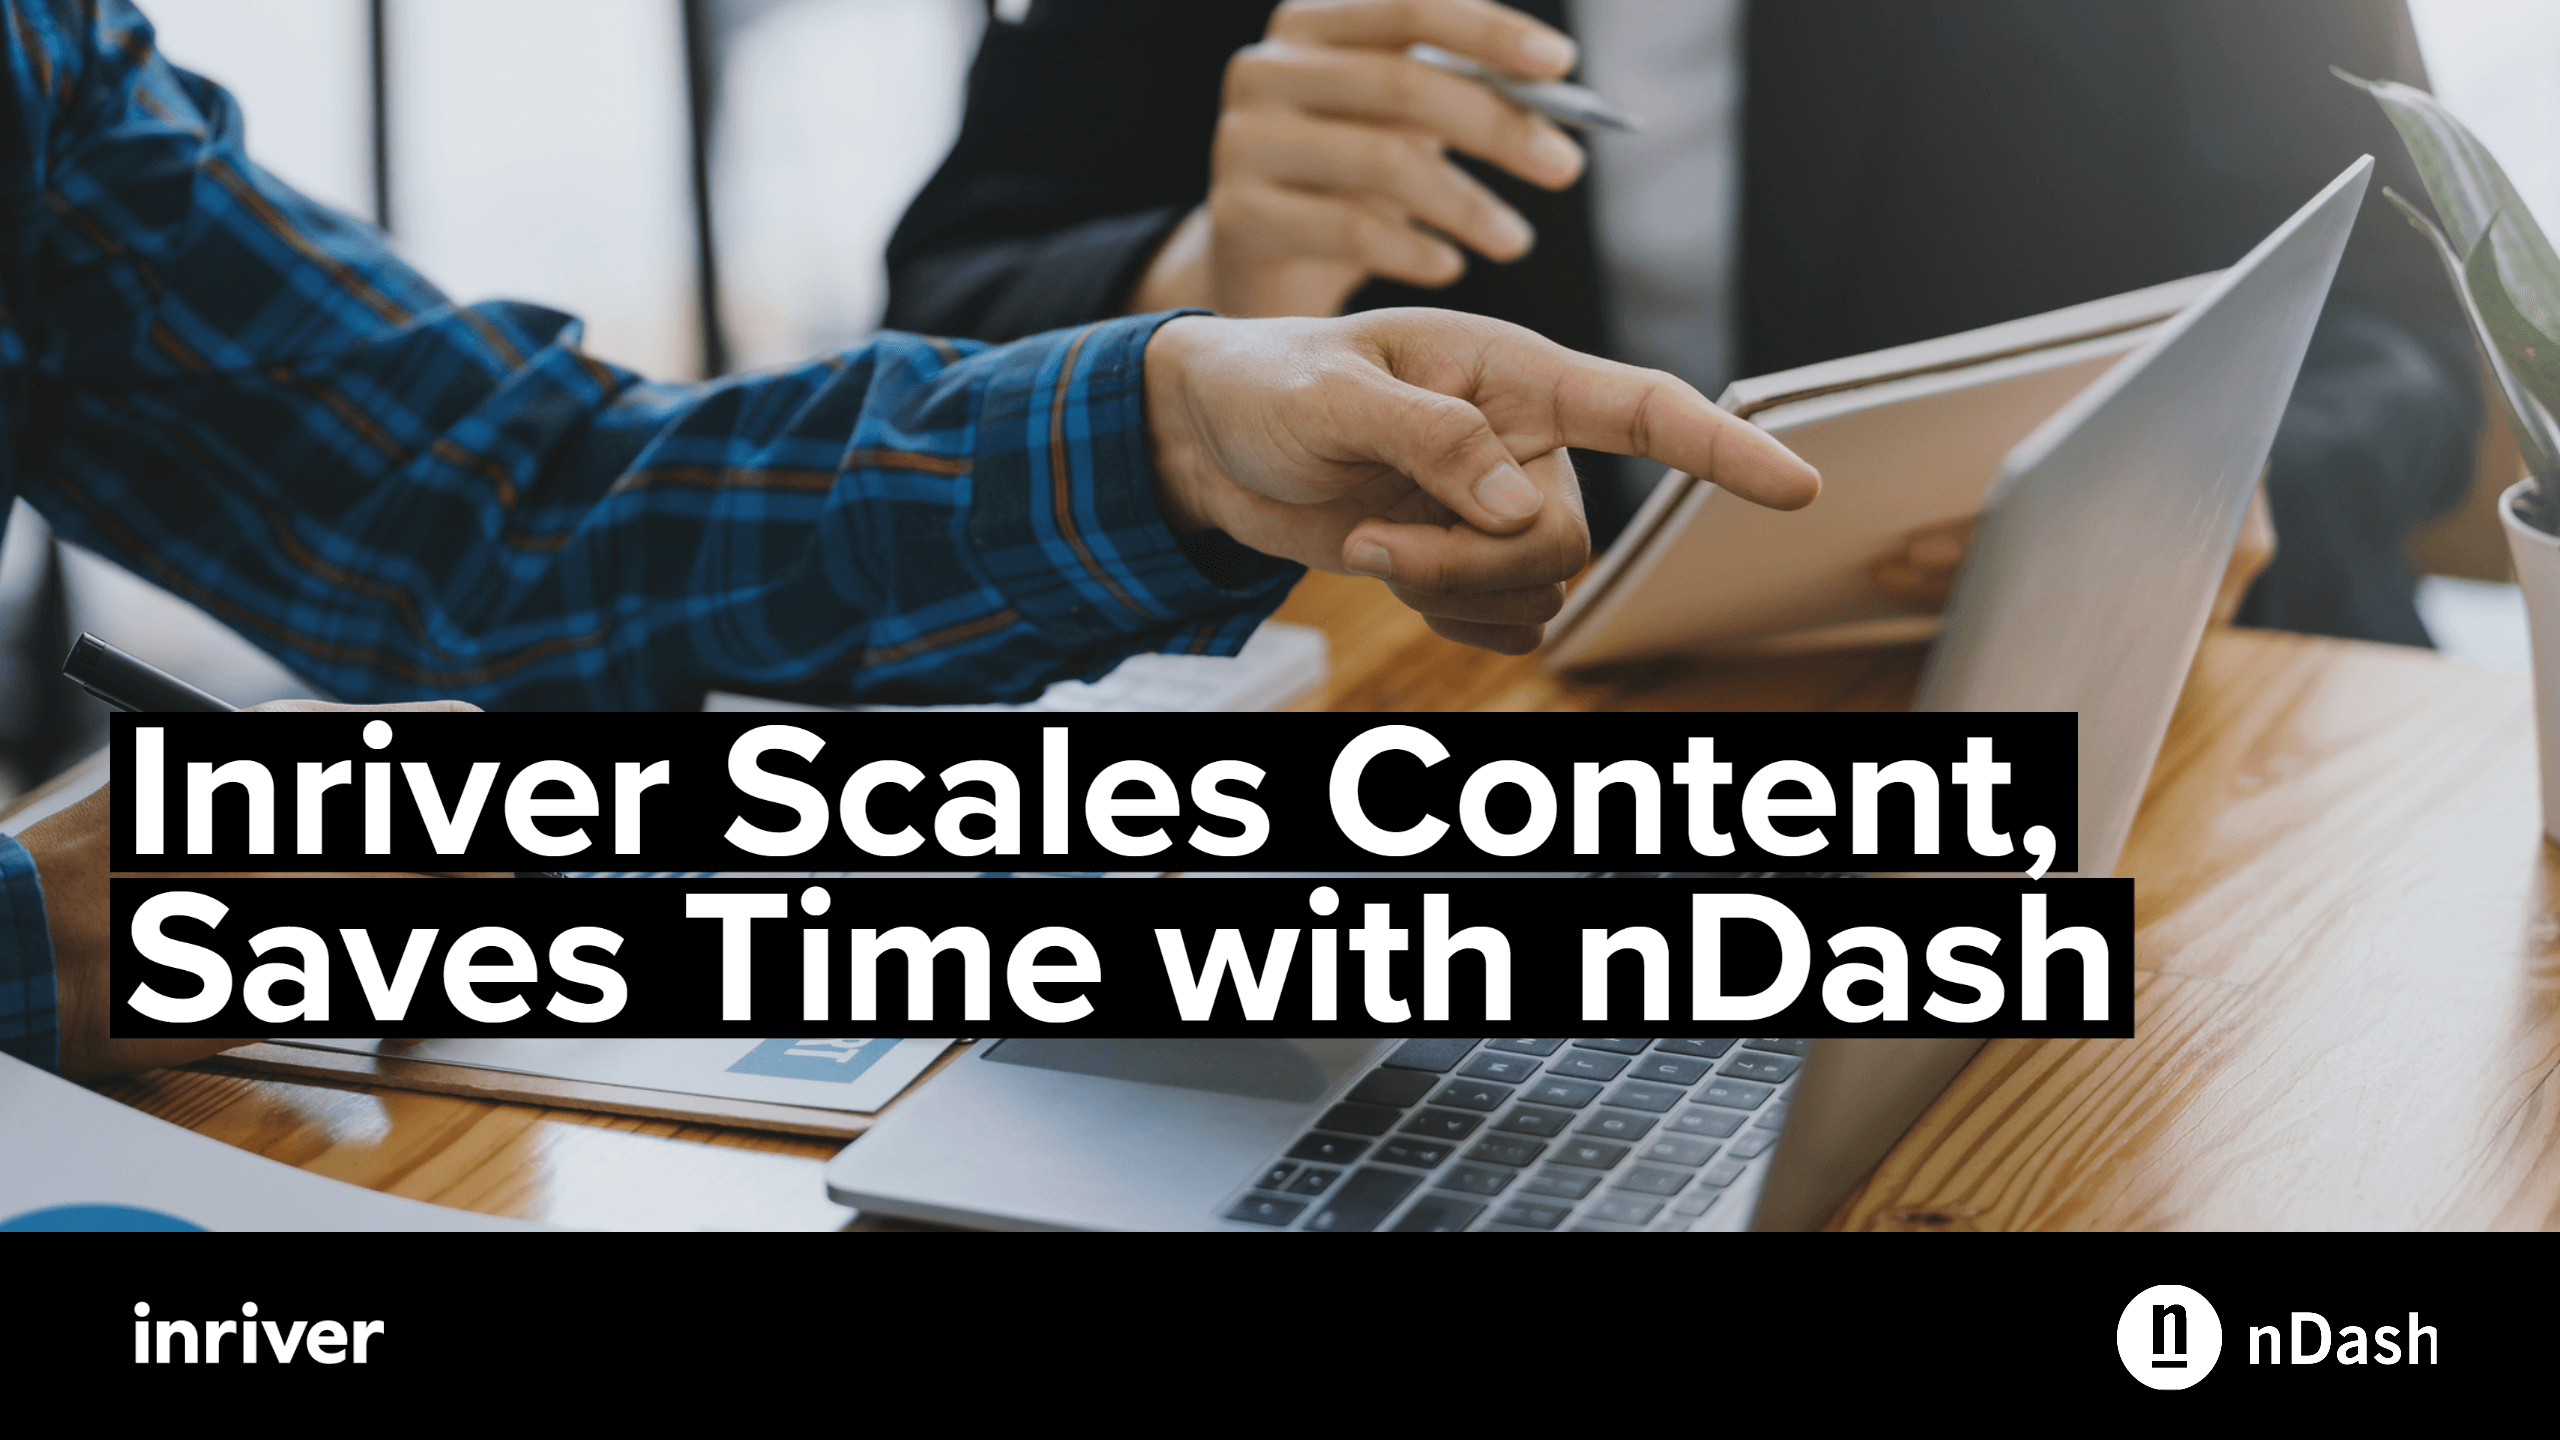 Inriver Scales Content, Saves Time with nDash